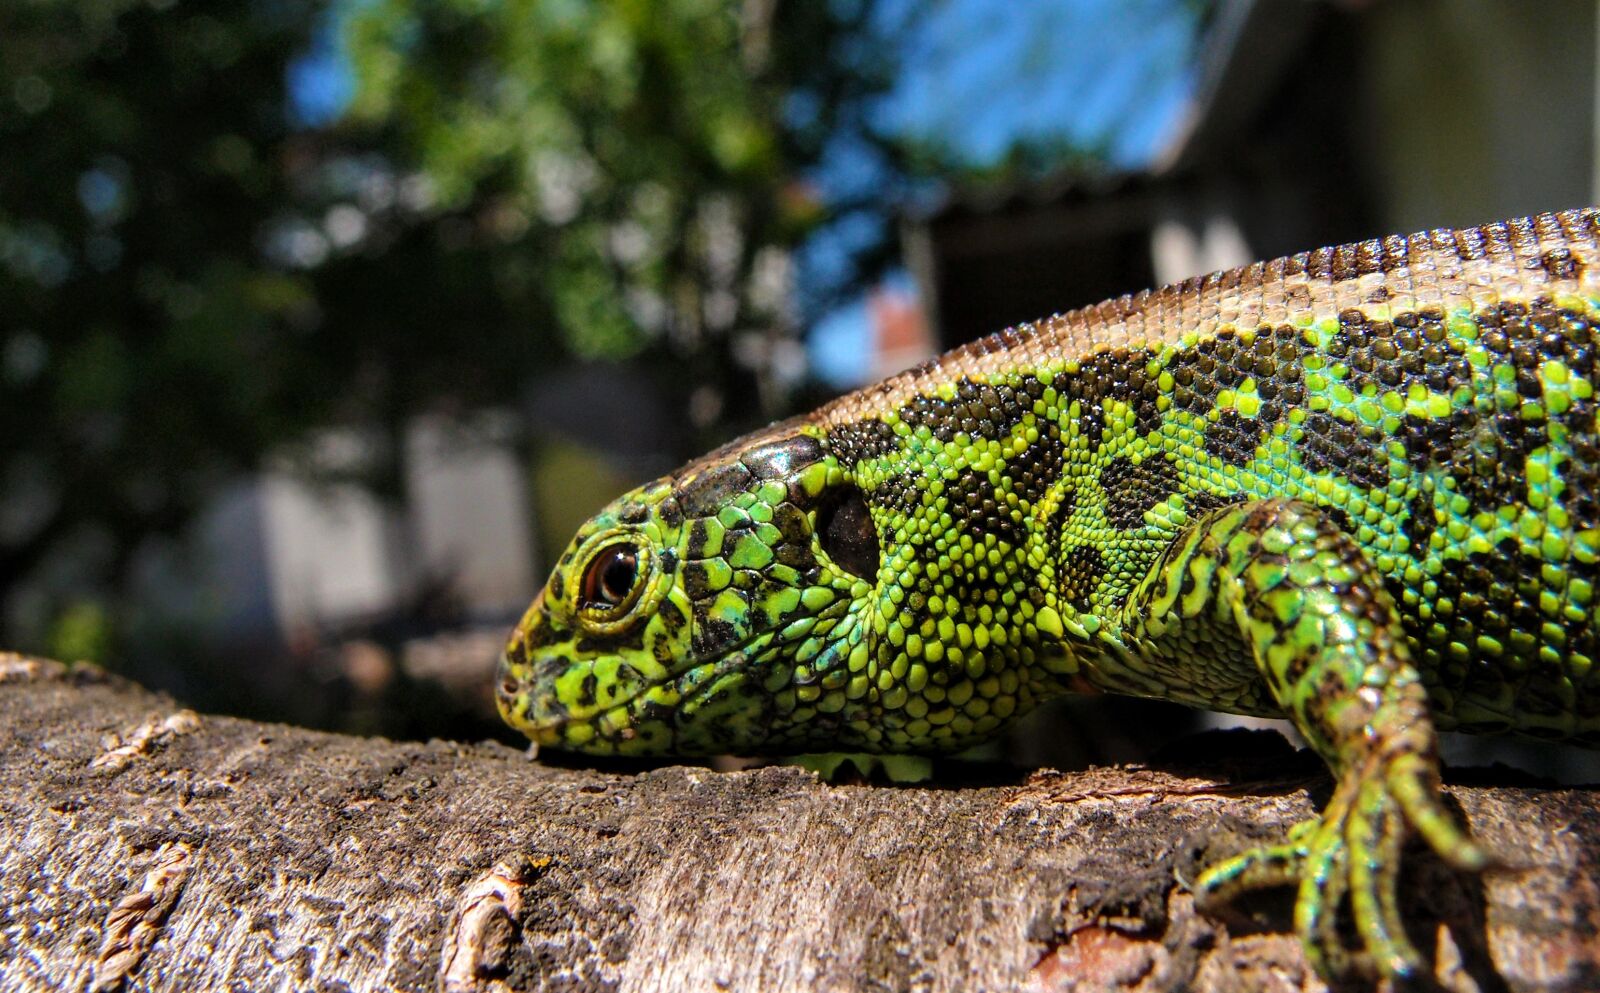 Olympus XZ-1 sample photo. Small lizard, green, colorful photography